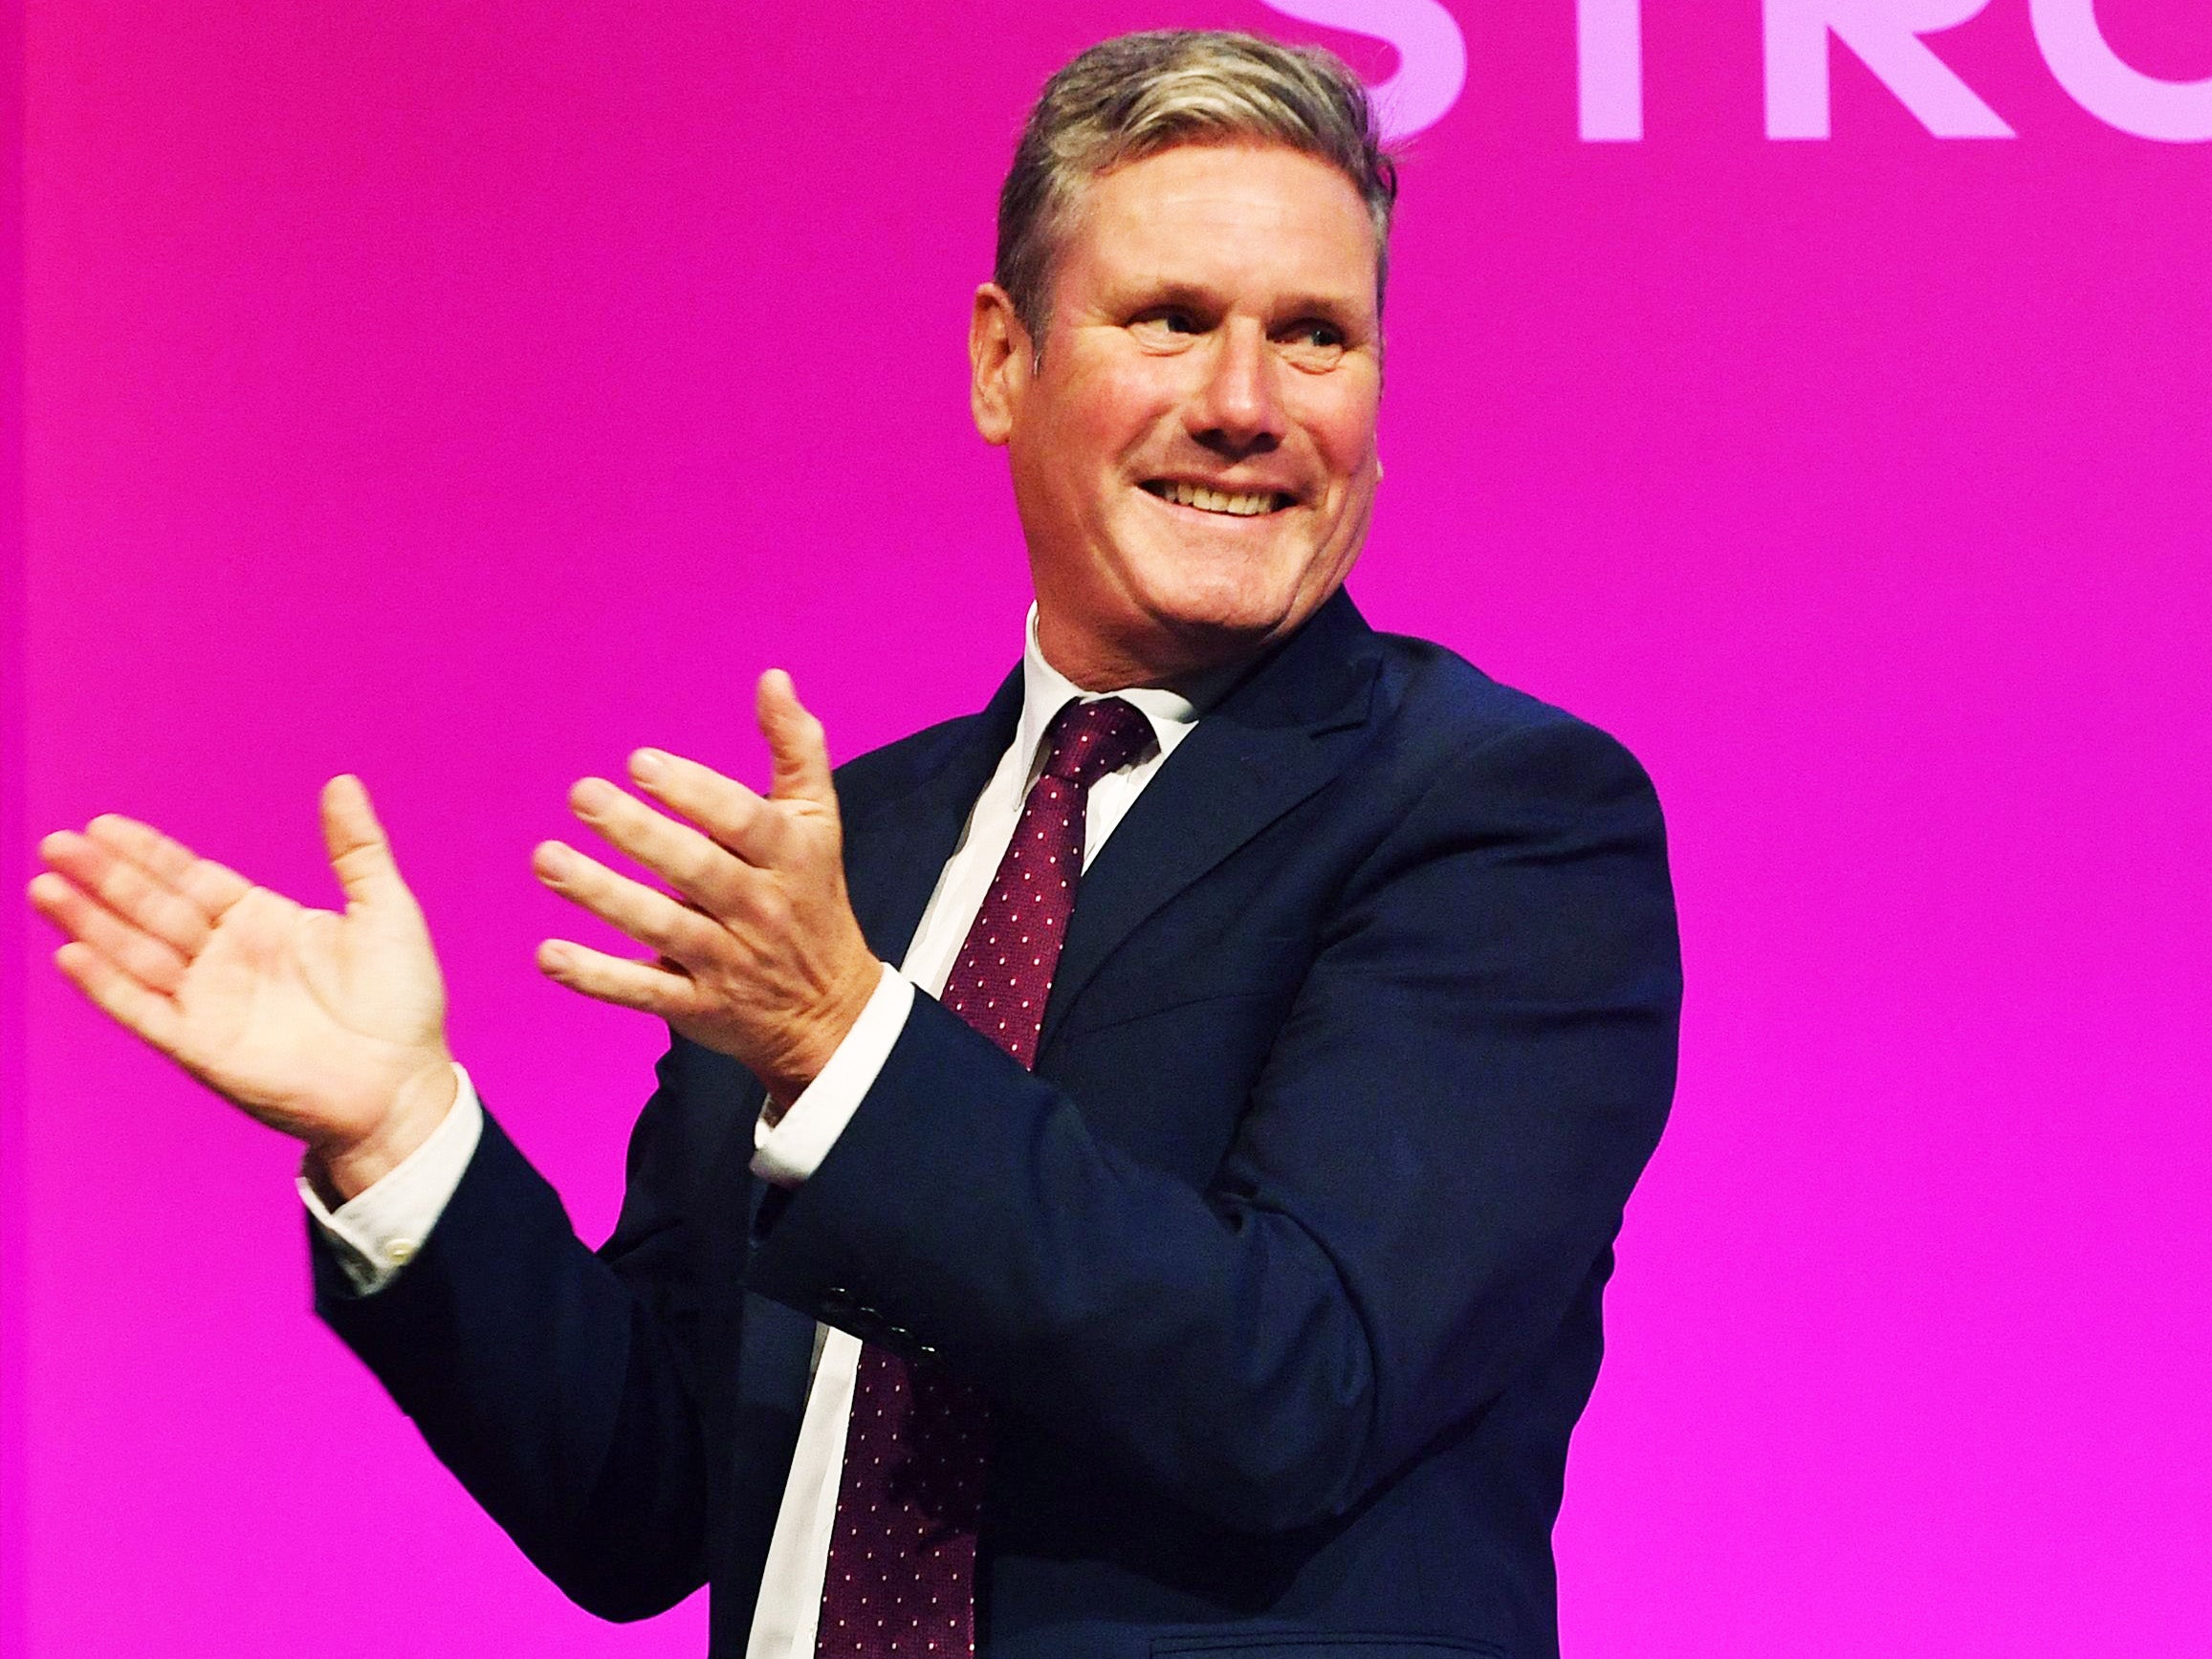 Keir Starmer applauds Rachel Reeves after her speech on the third day of the annual Labour Party Conference in Brighton